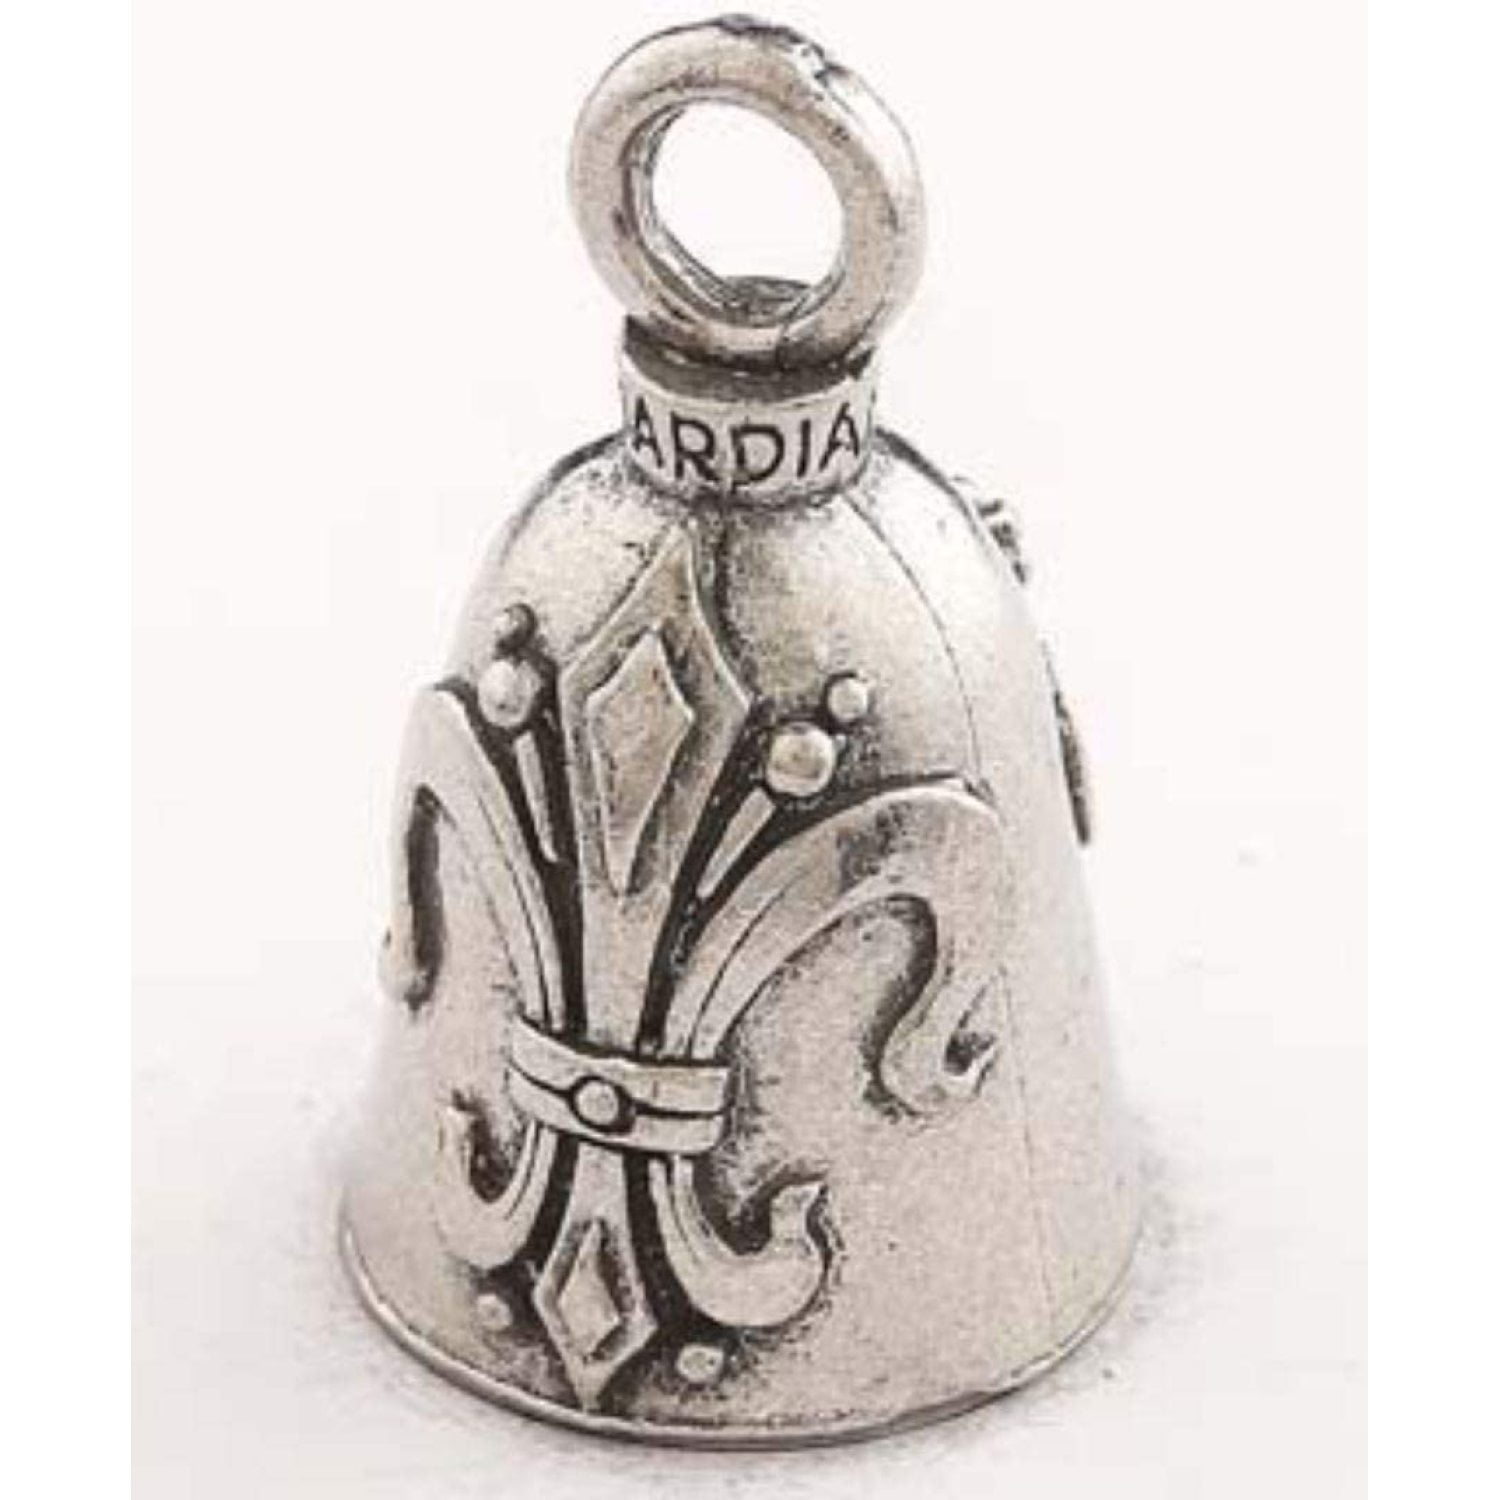 Ardia Hd Blended Sex Videos - TaliaPosy Fleur DE LIS Motorcycle - Harley Accessory HD Gremlin New Riding  Bell Key Ring, Made in the USA By Brand TaliaPosy - Walmart.com